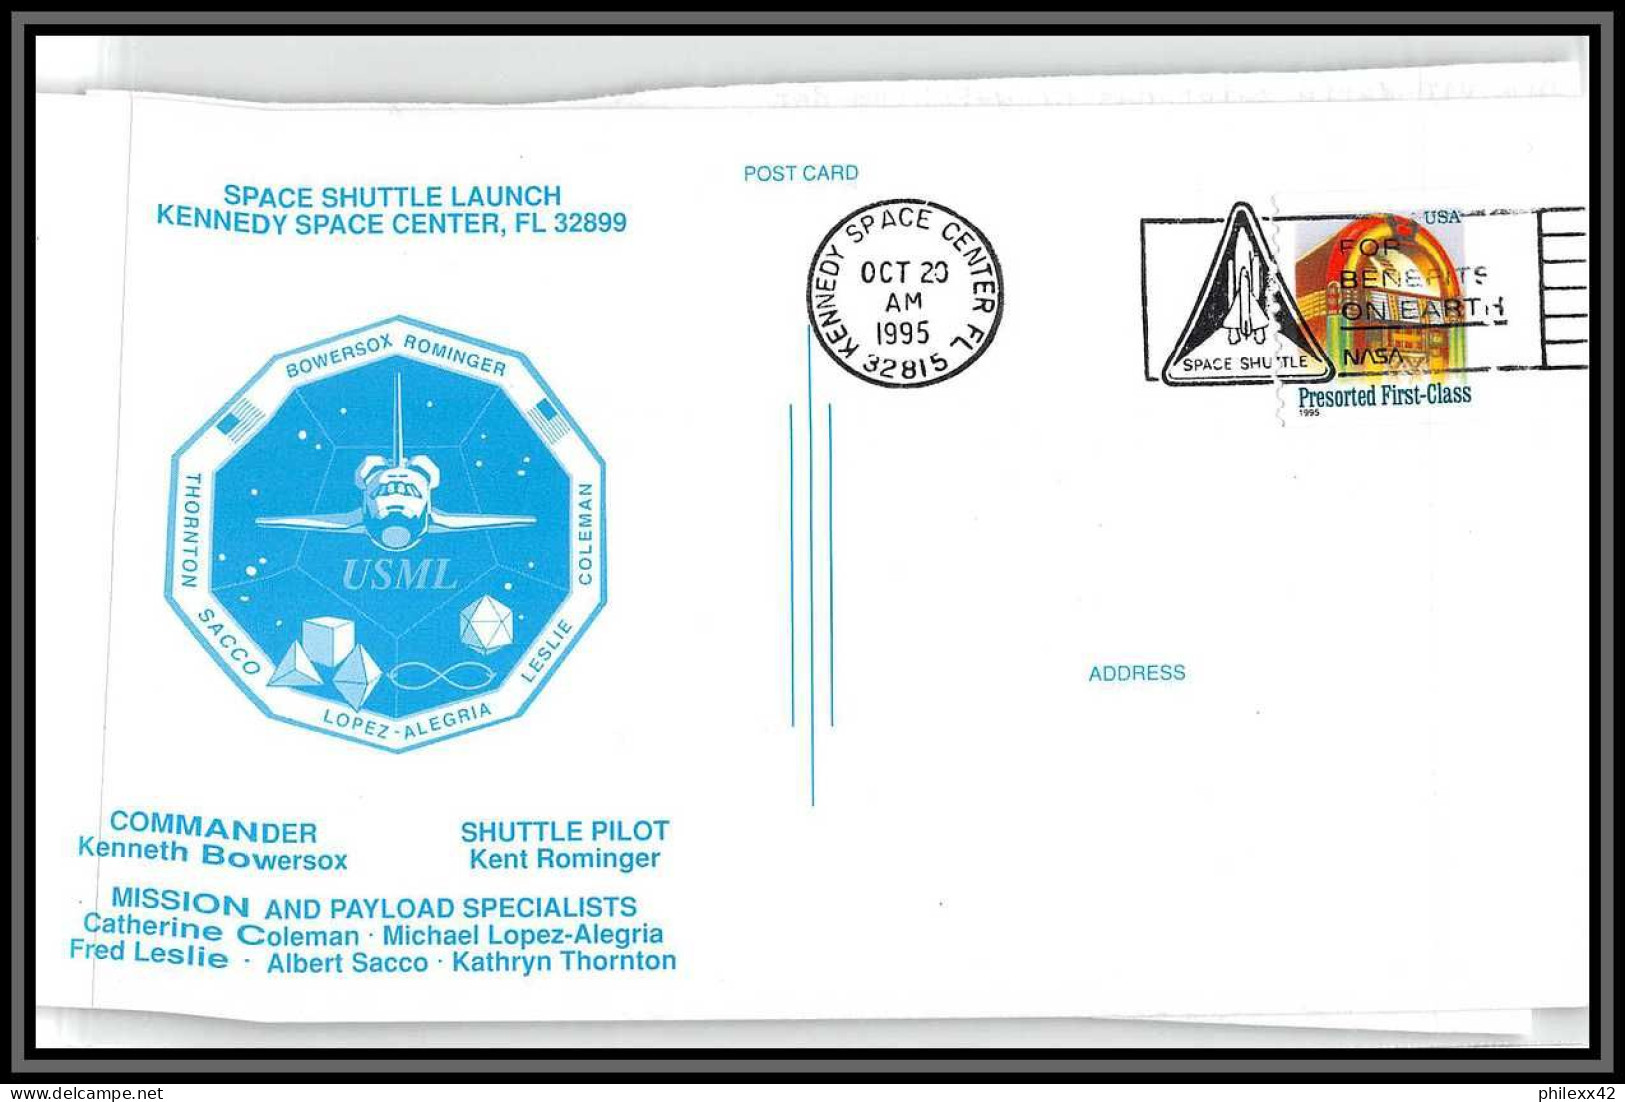 2150 Espace (space Raumfahrt) Lettre (cover Briefe) USA Sts-73 Start Columbia Navette Shuttle 20/10/1995 - Verenigde Staten